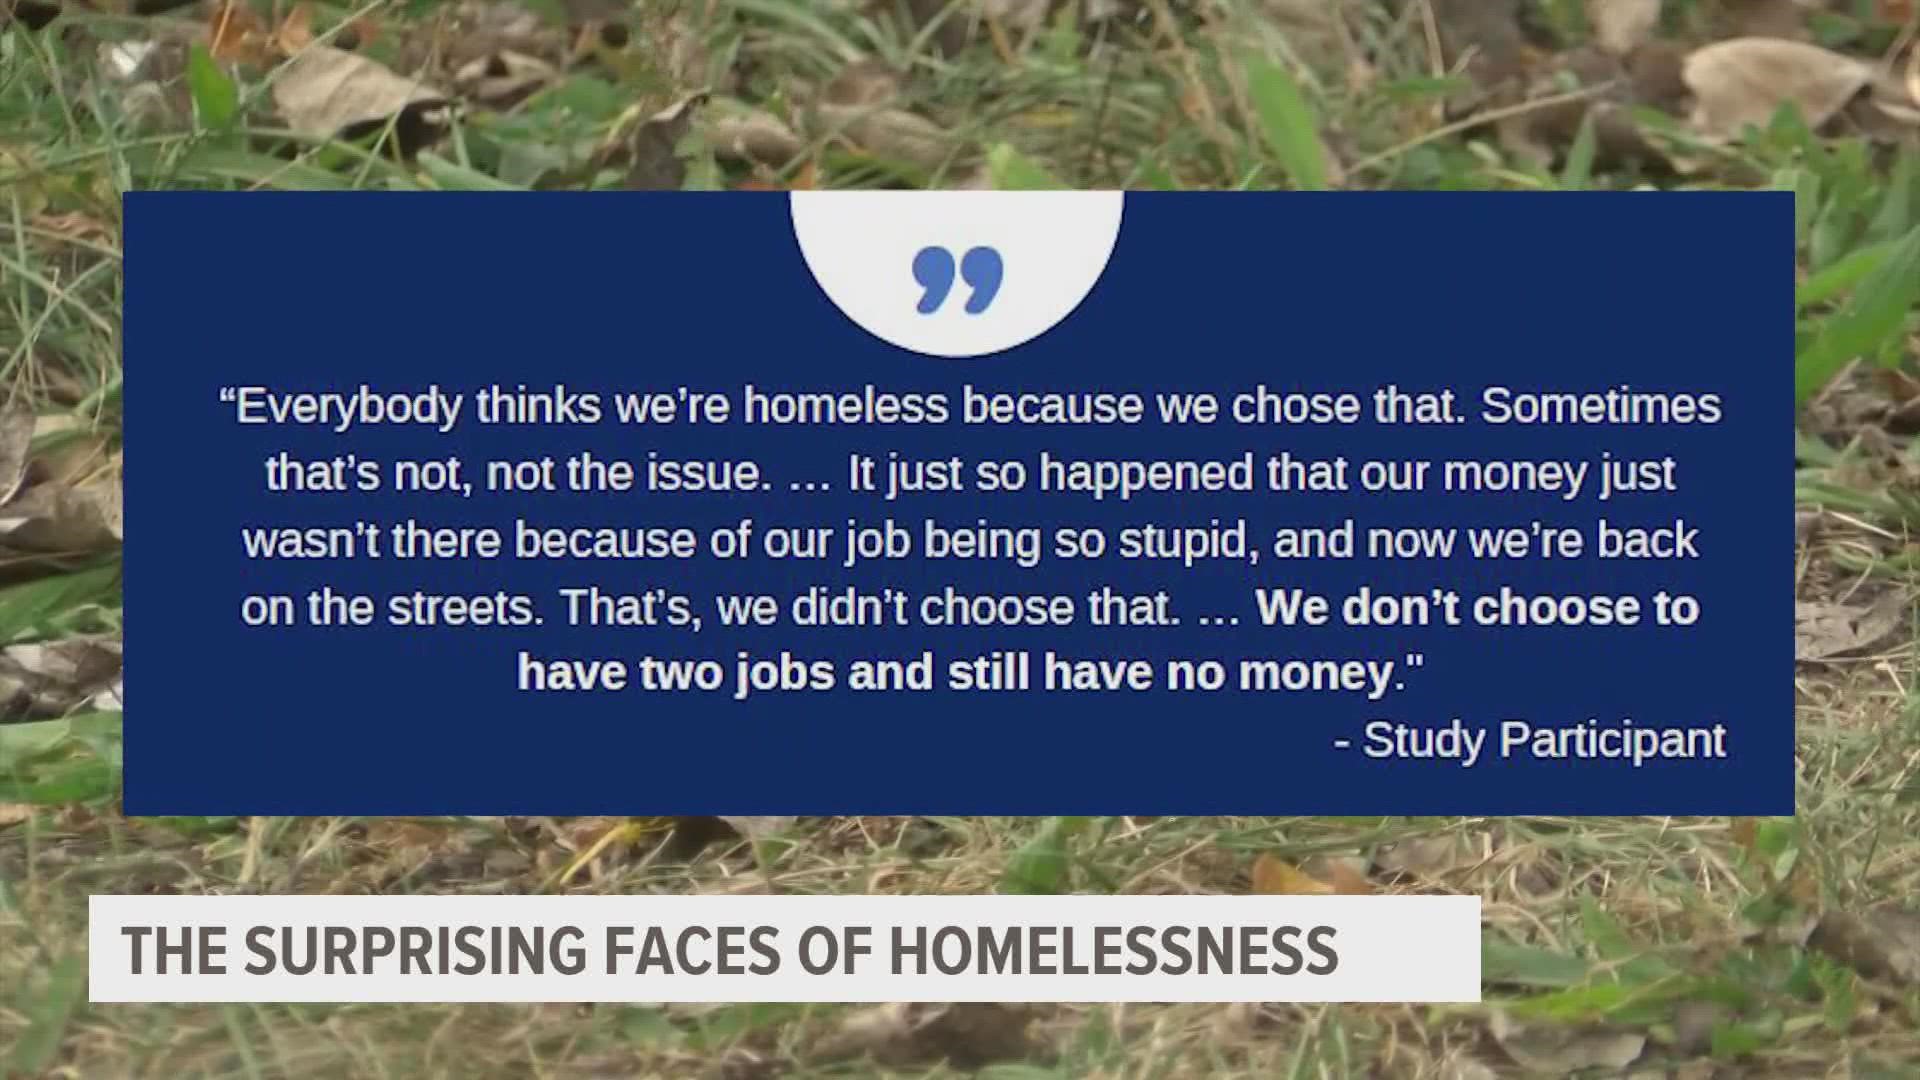 The study interviewed 37 Polk County residents who have experienced homelessness.